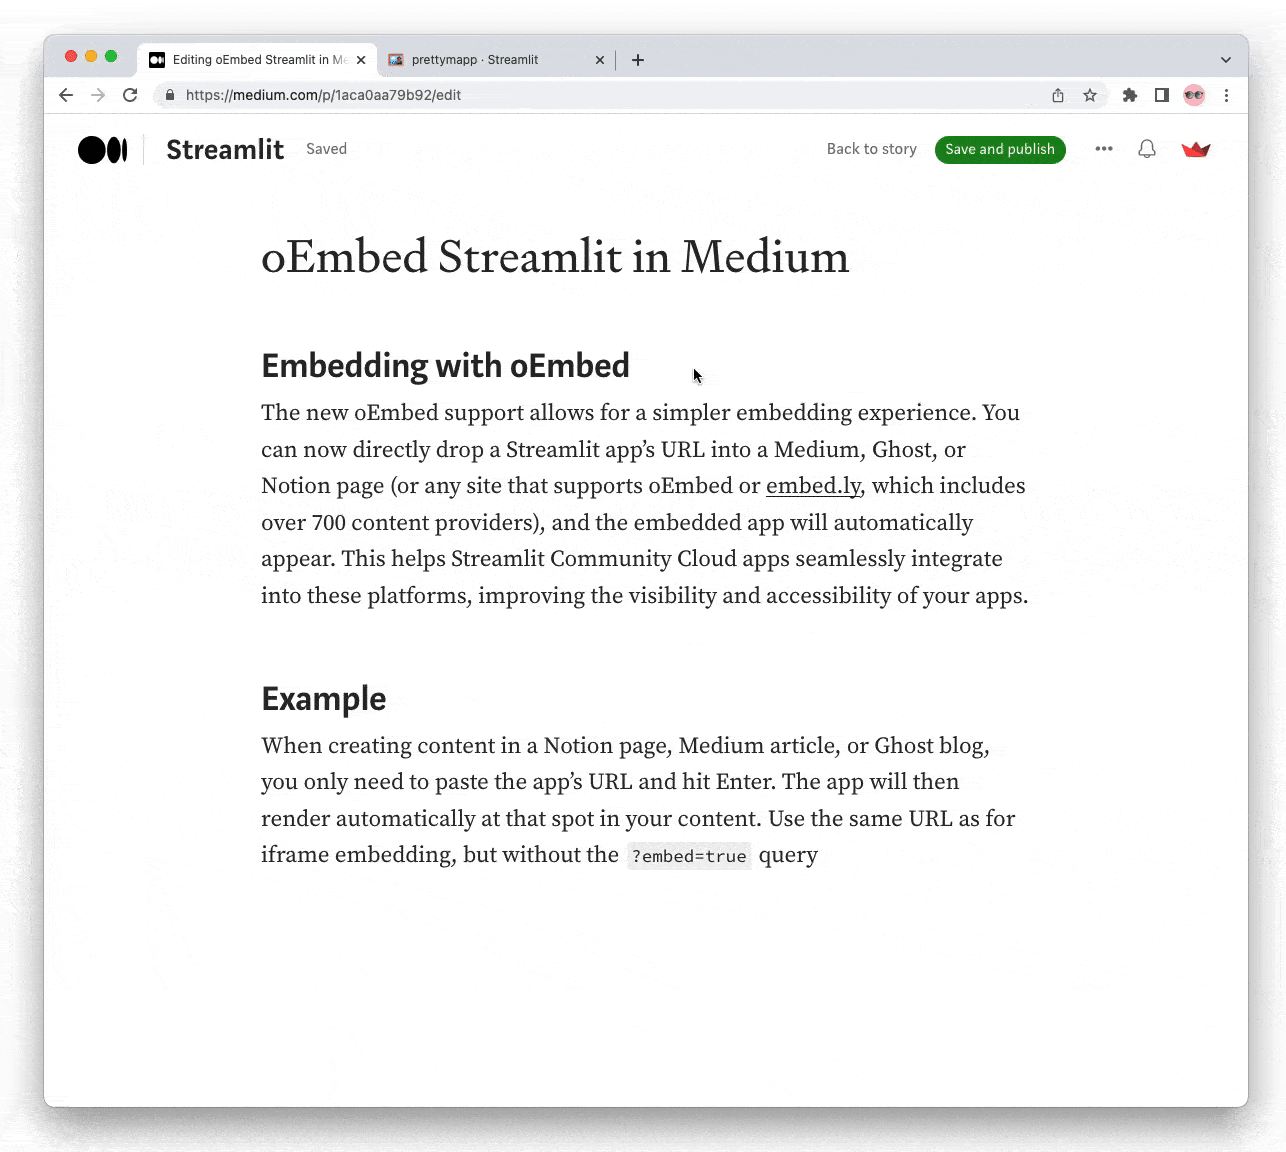 Example: Embed an app in a Medium article with oEmbed